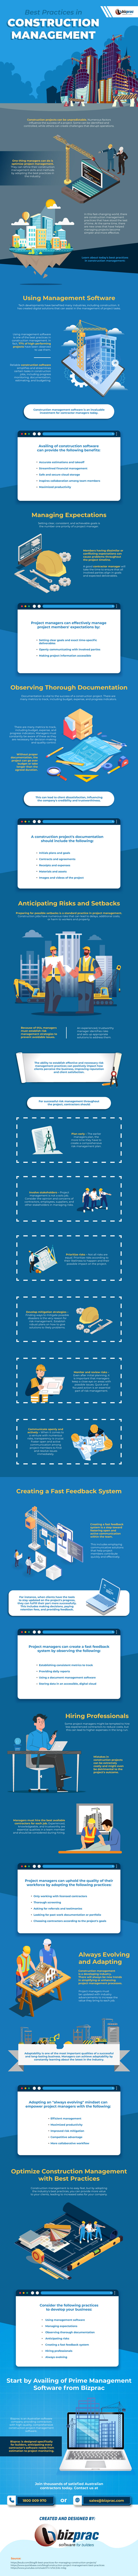 Best-Practices-in-Construction-Management-Infographic-00